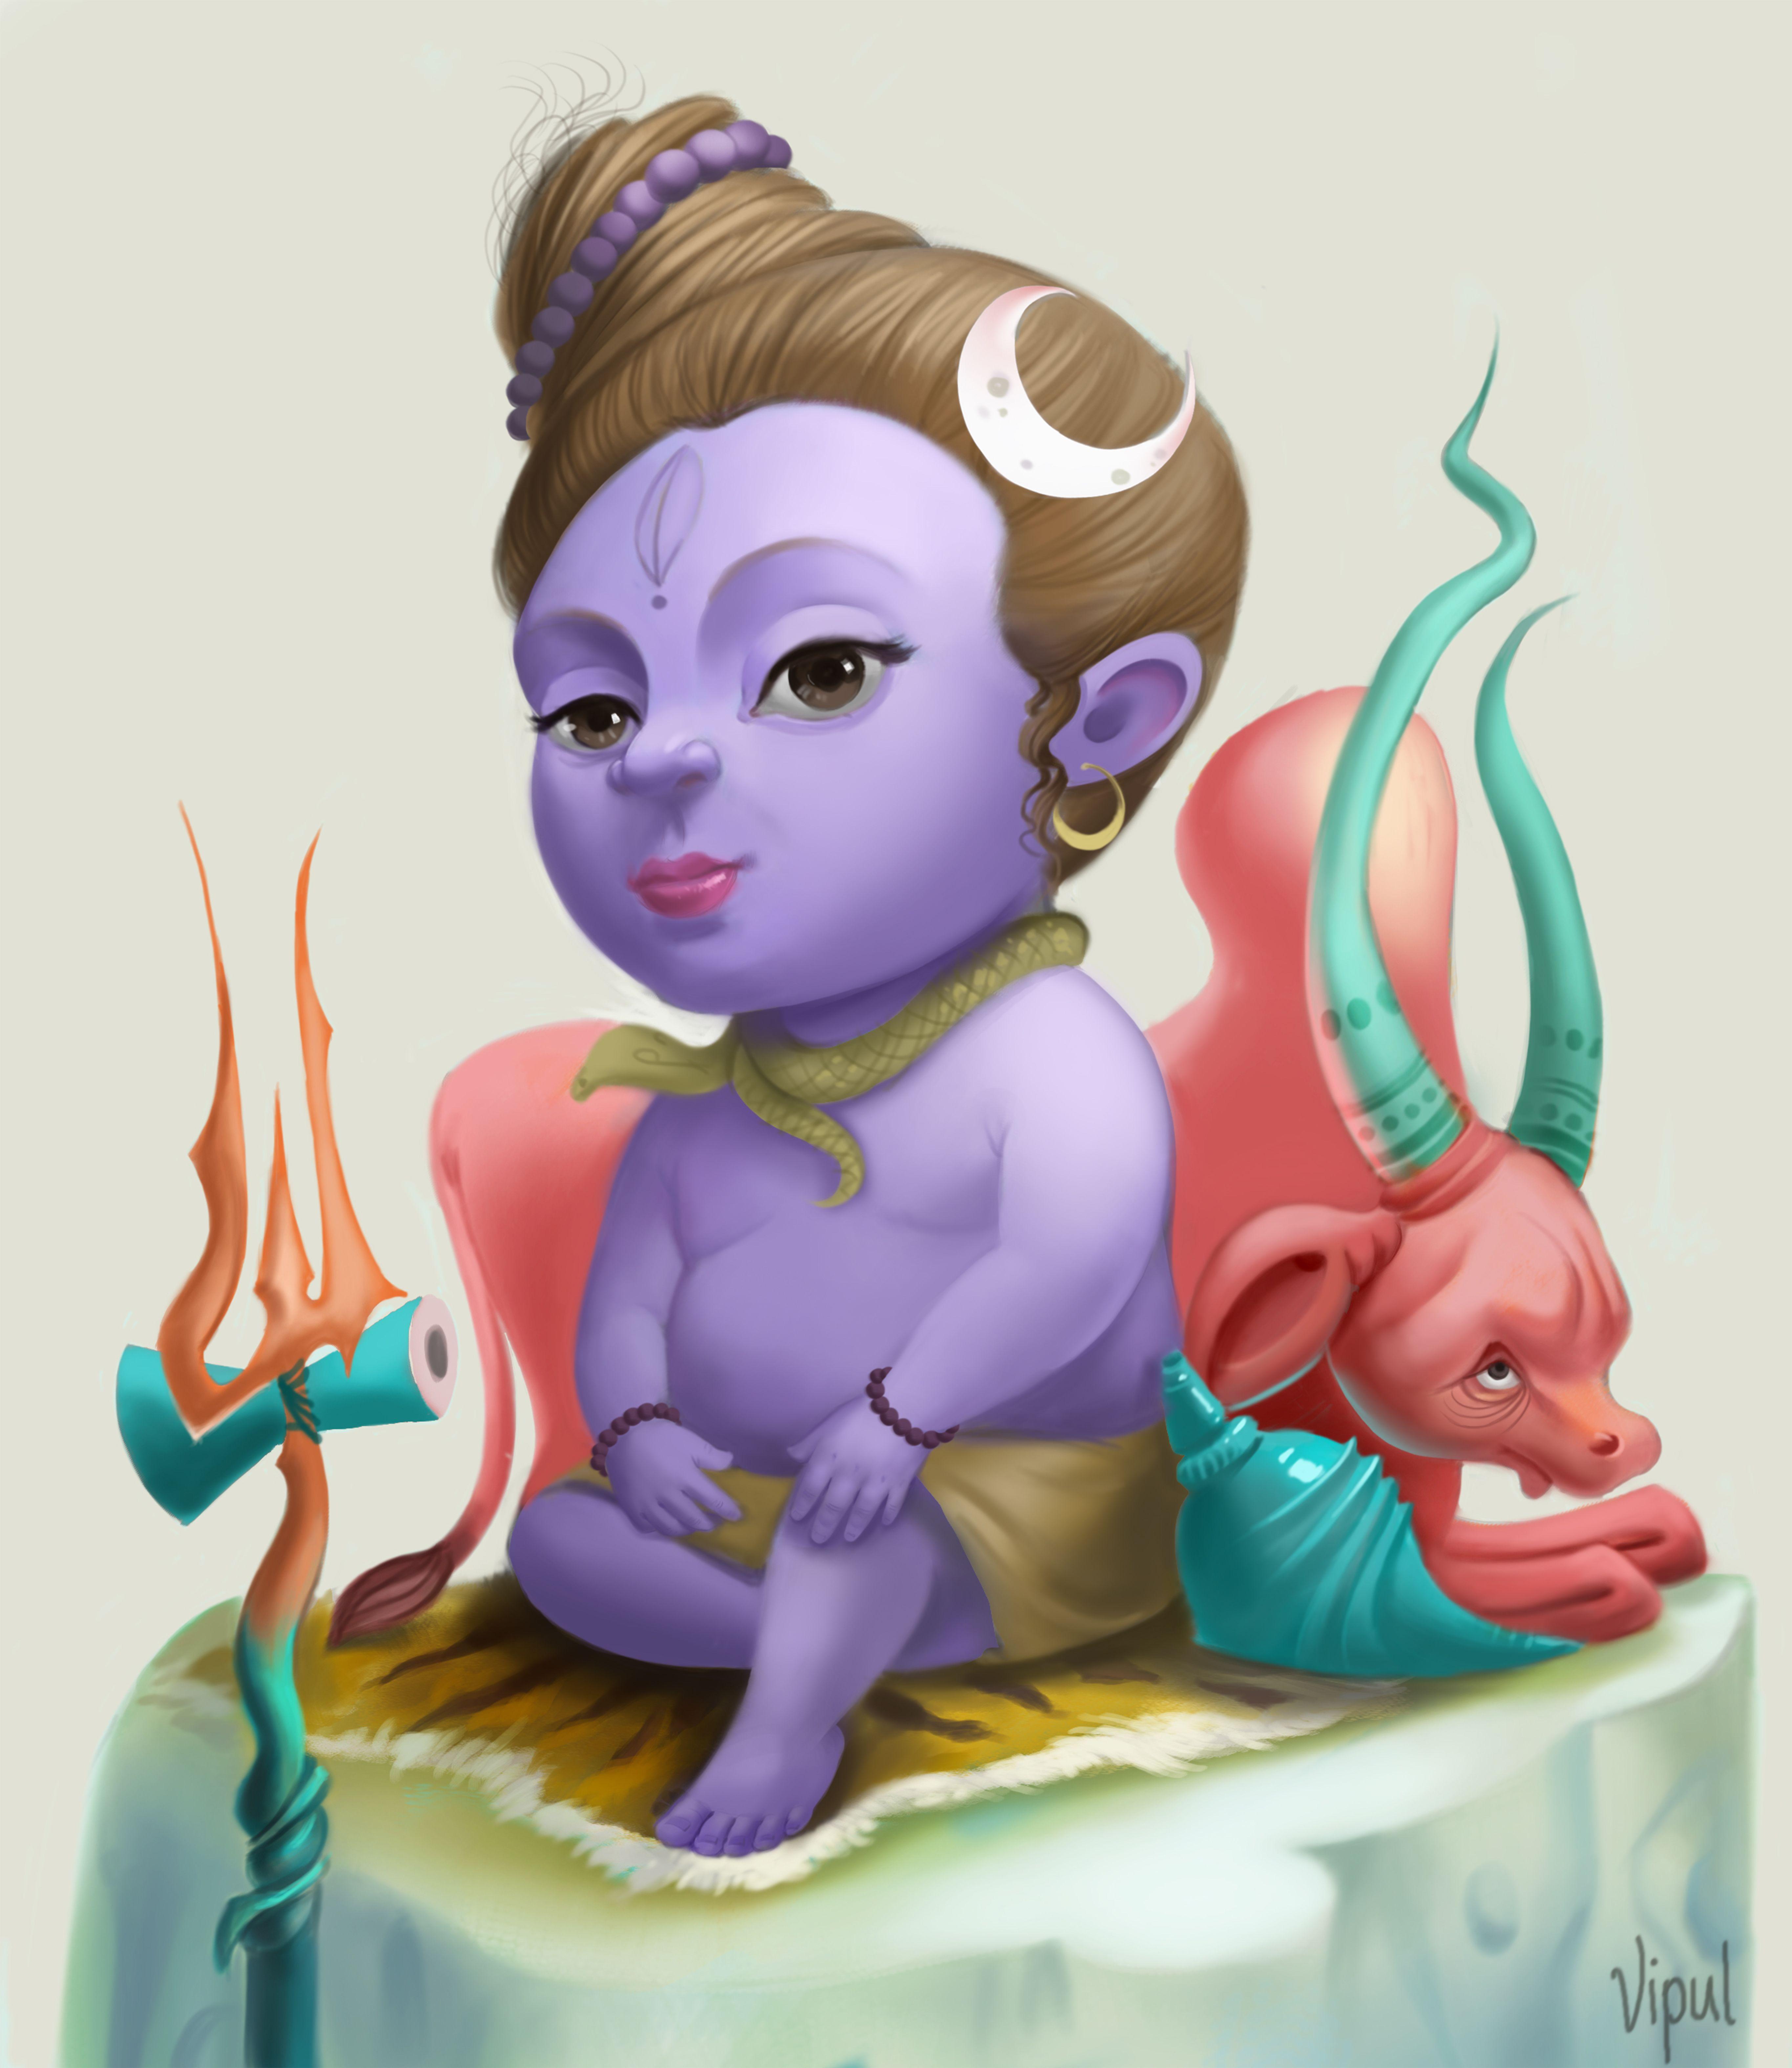 Bal Shiva art.This is a child form avatar of lord shiva .i